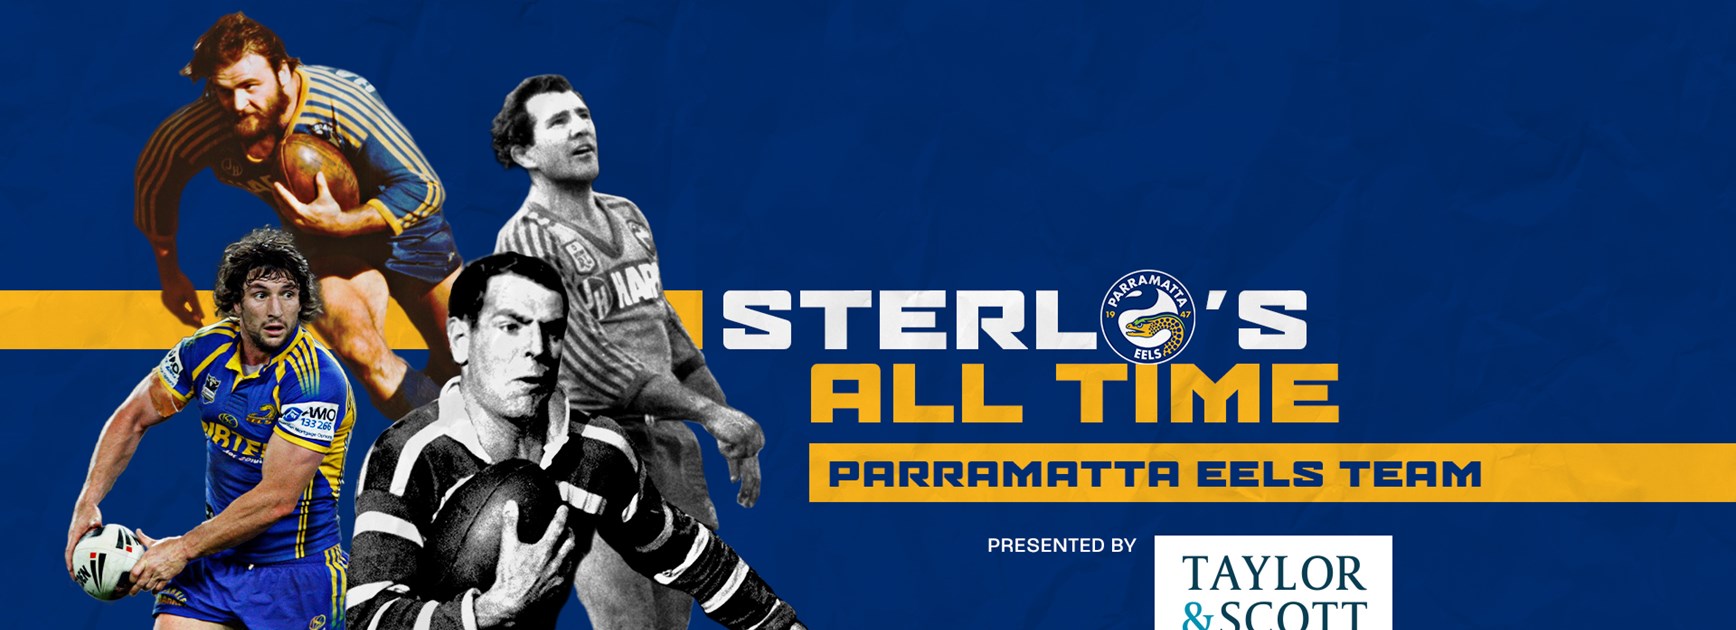 Sterlo's All Time Parramatta Team Presented by Taylor and Scott